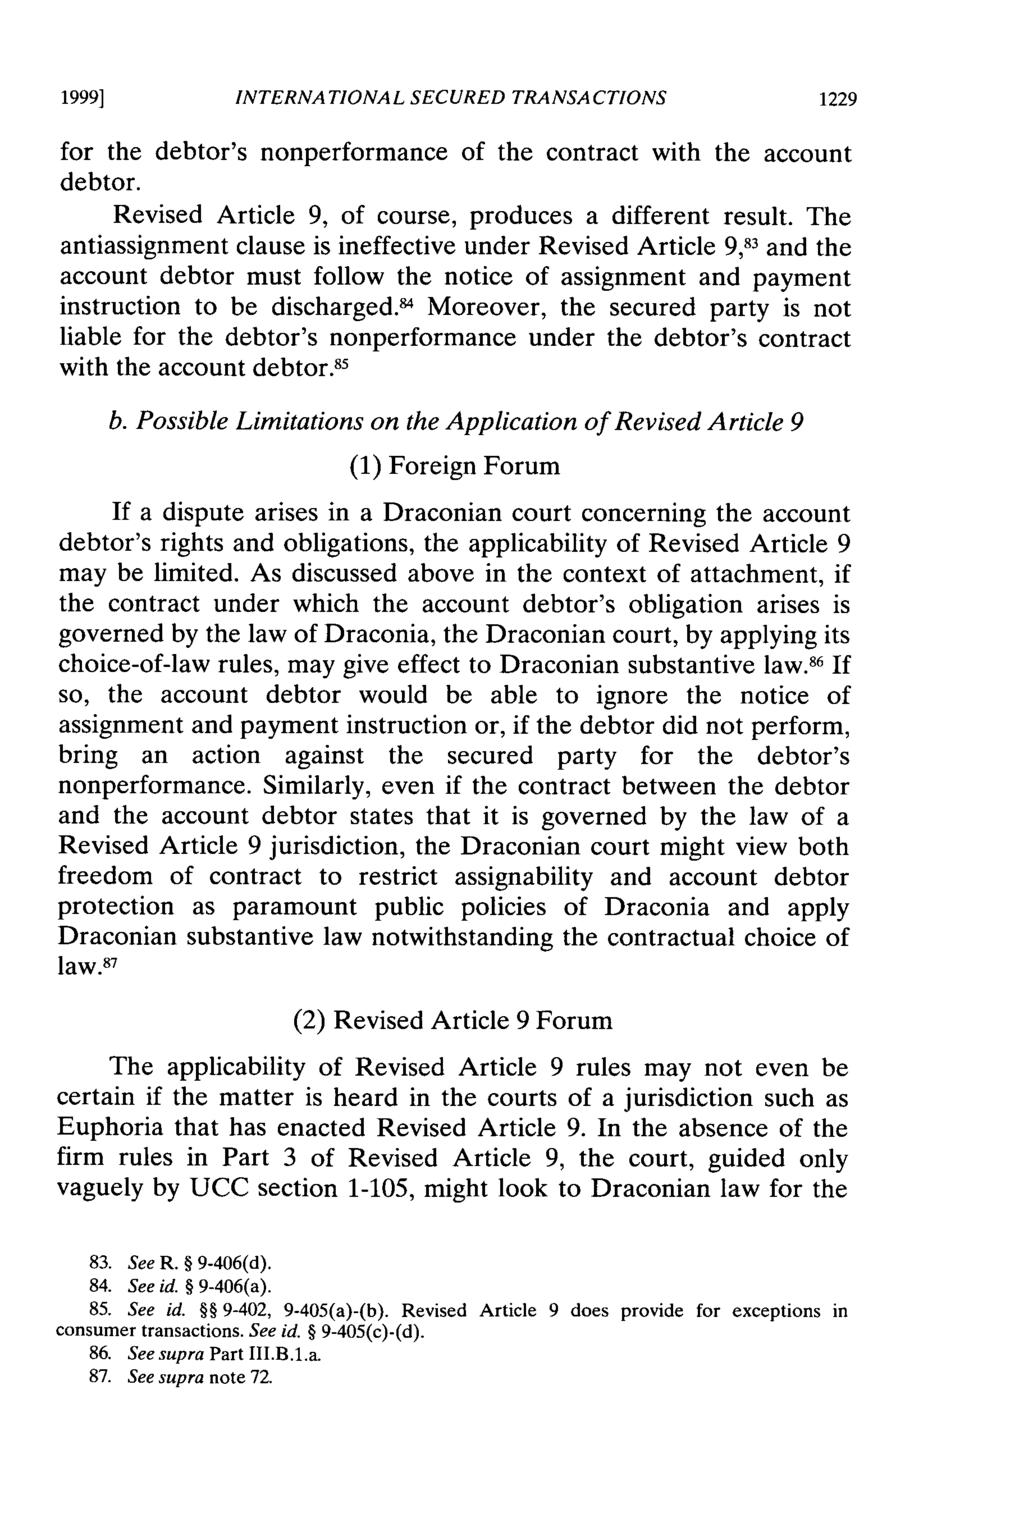 1999] INTERNATIONAL SECURED TRANSACTIONS for the debtor's nonperformance of the contract with the account debtor. Revised Article 9, of course, produces a different result.